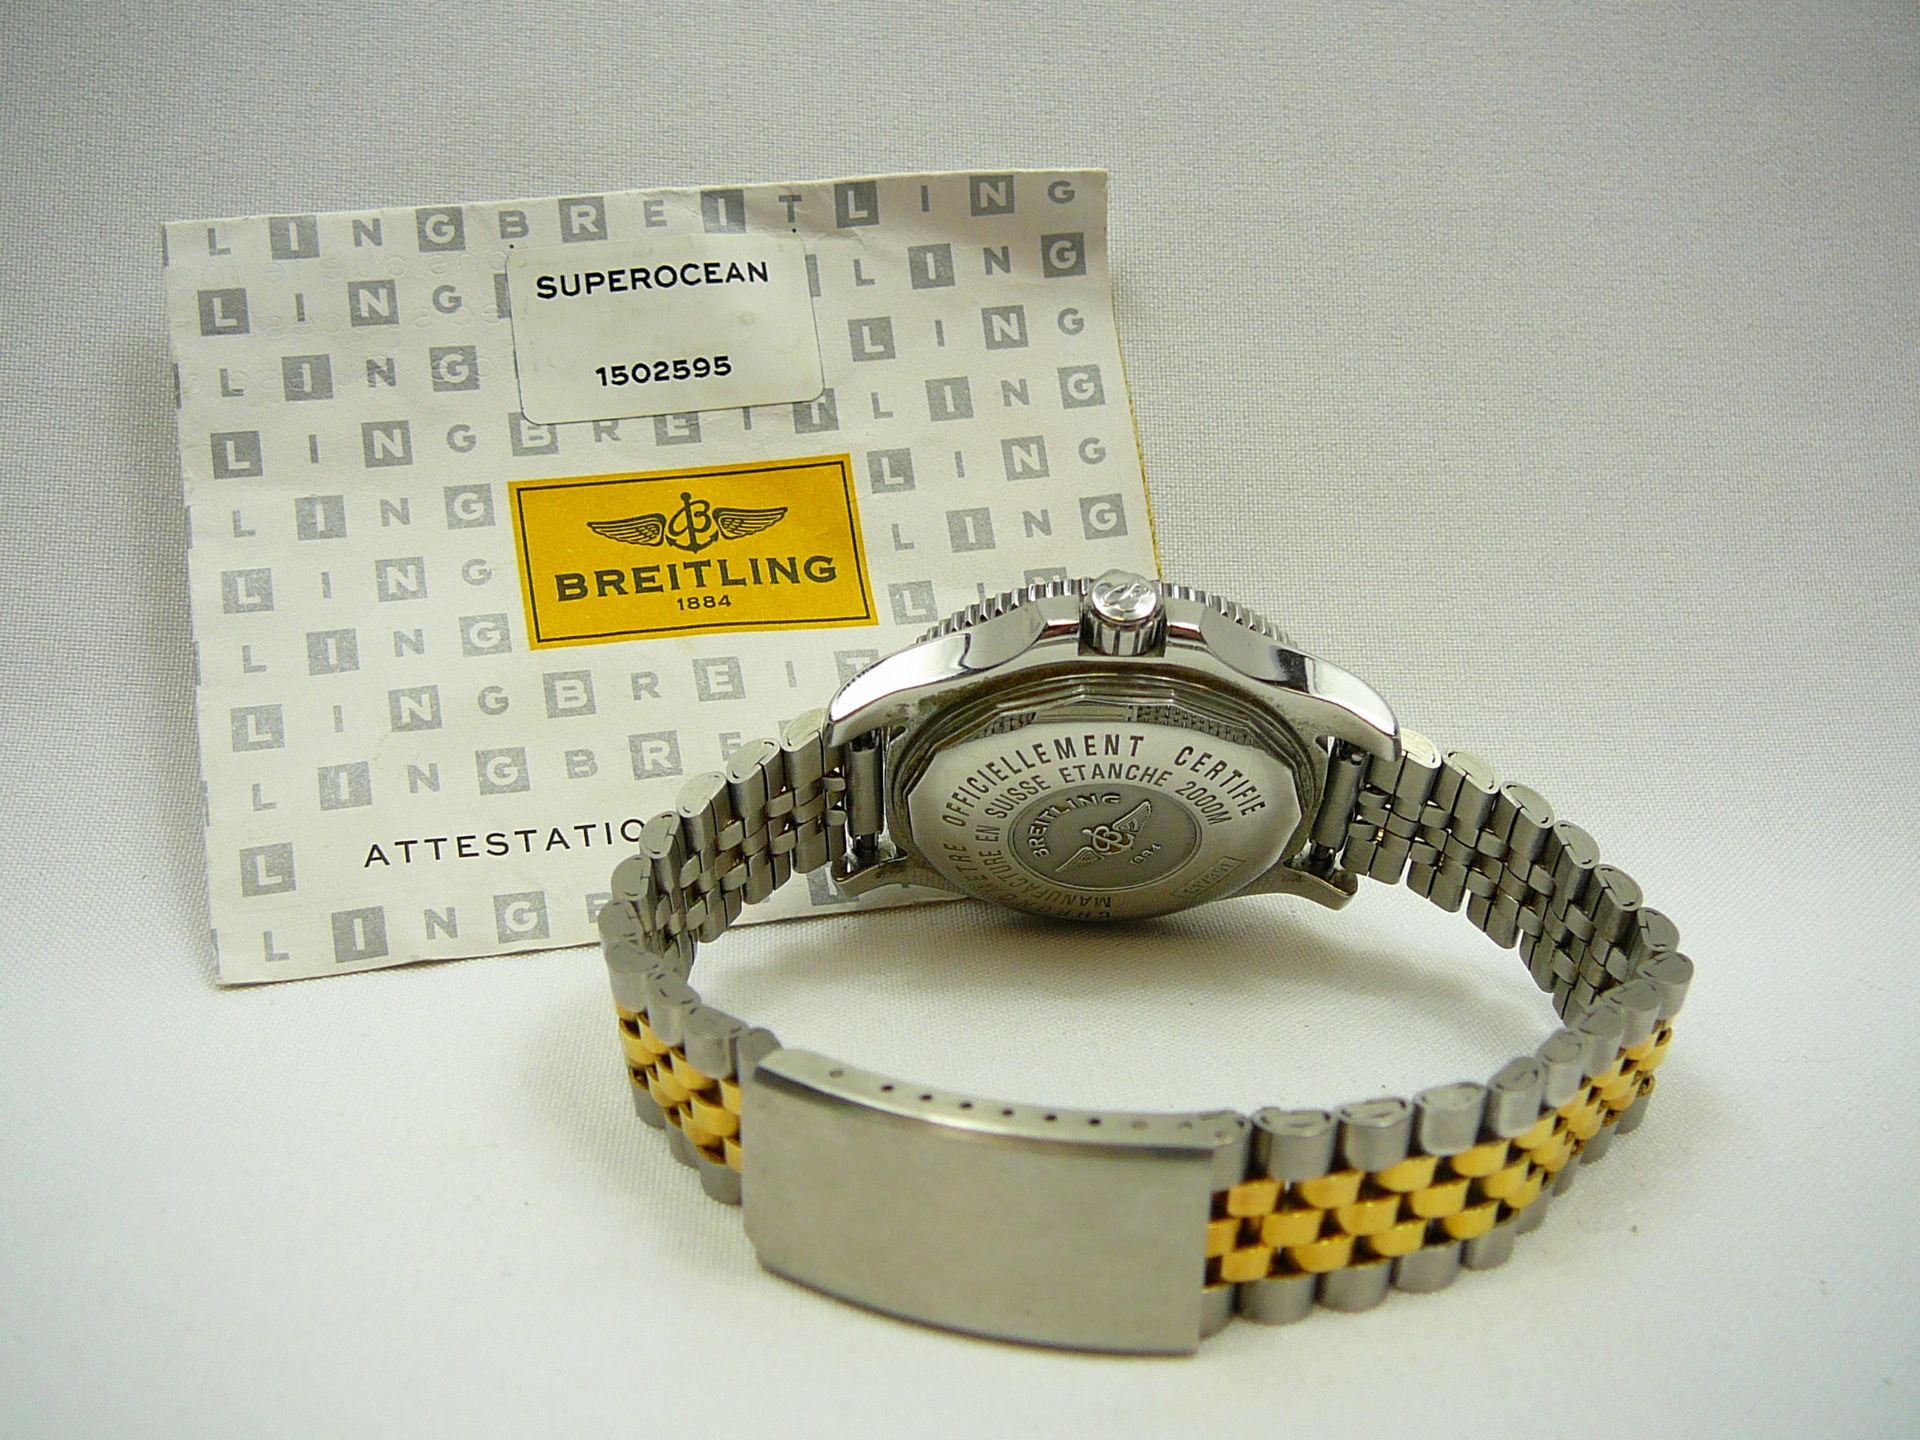 Gents Breitling Wristwatch - Image 3 of 3